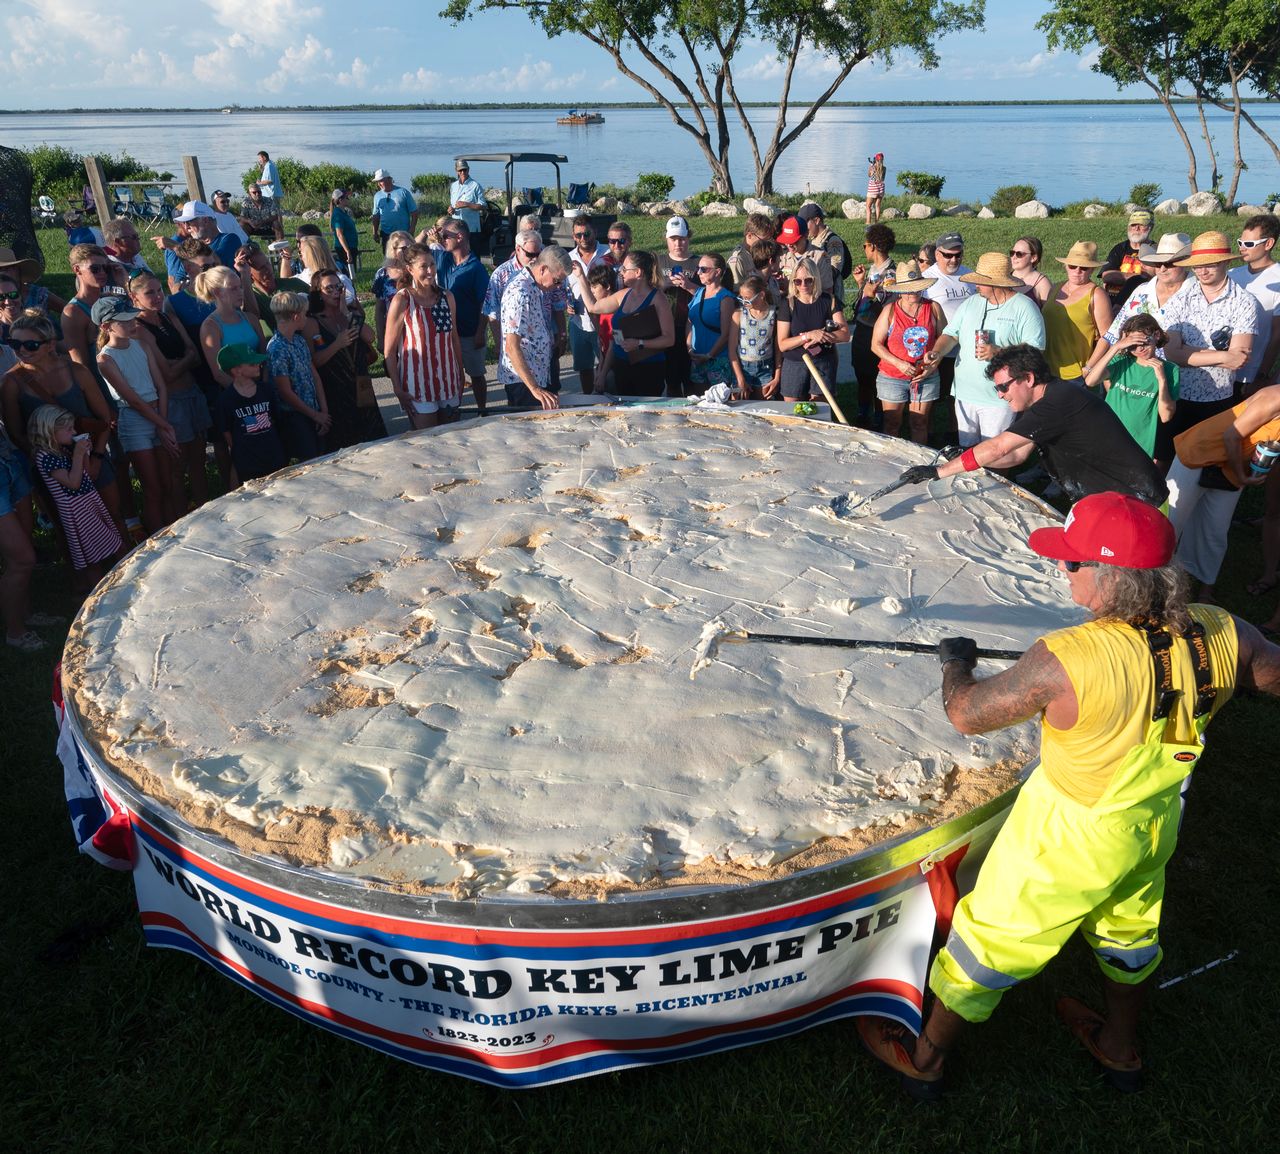 Chefs Paul Menta, front right and David Sloan, back right, put finishing touches on a gargantuan Key lime pie created for a 200th Florida Keys birthday celebration. Photos: Andy Newman